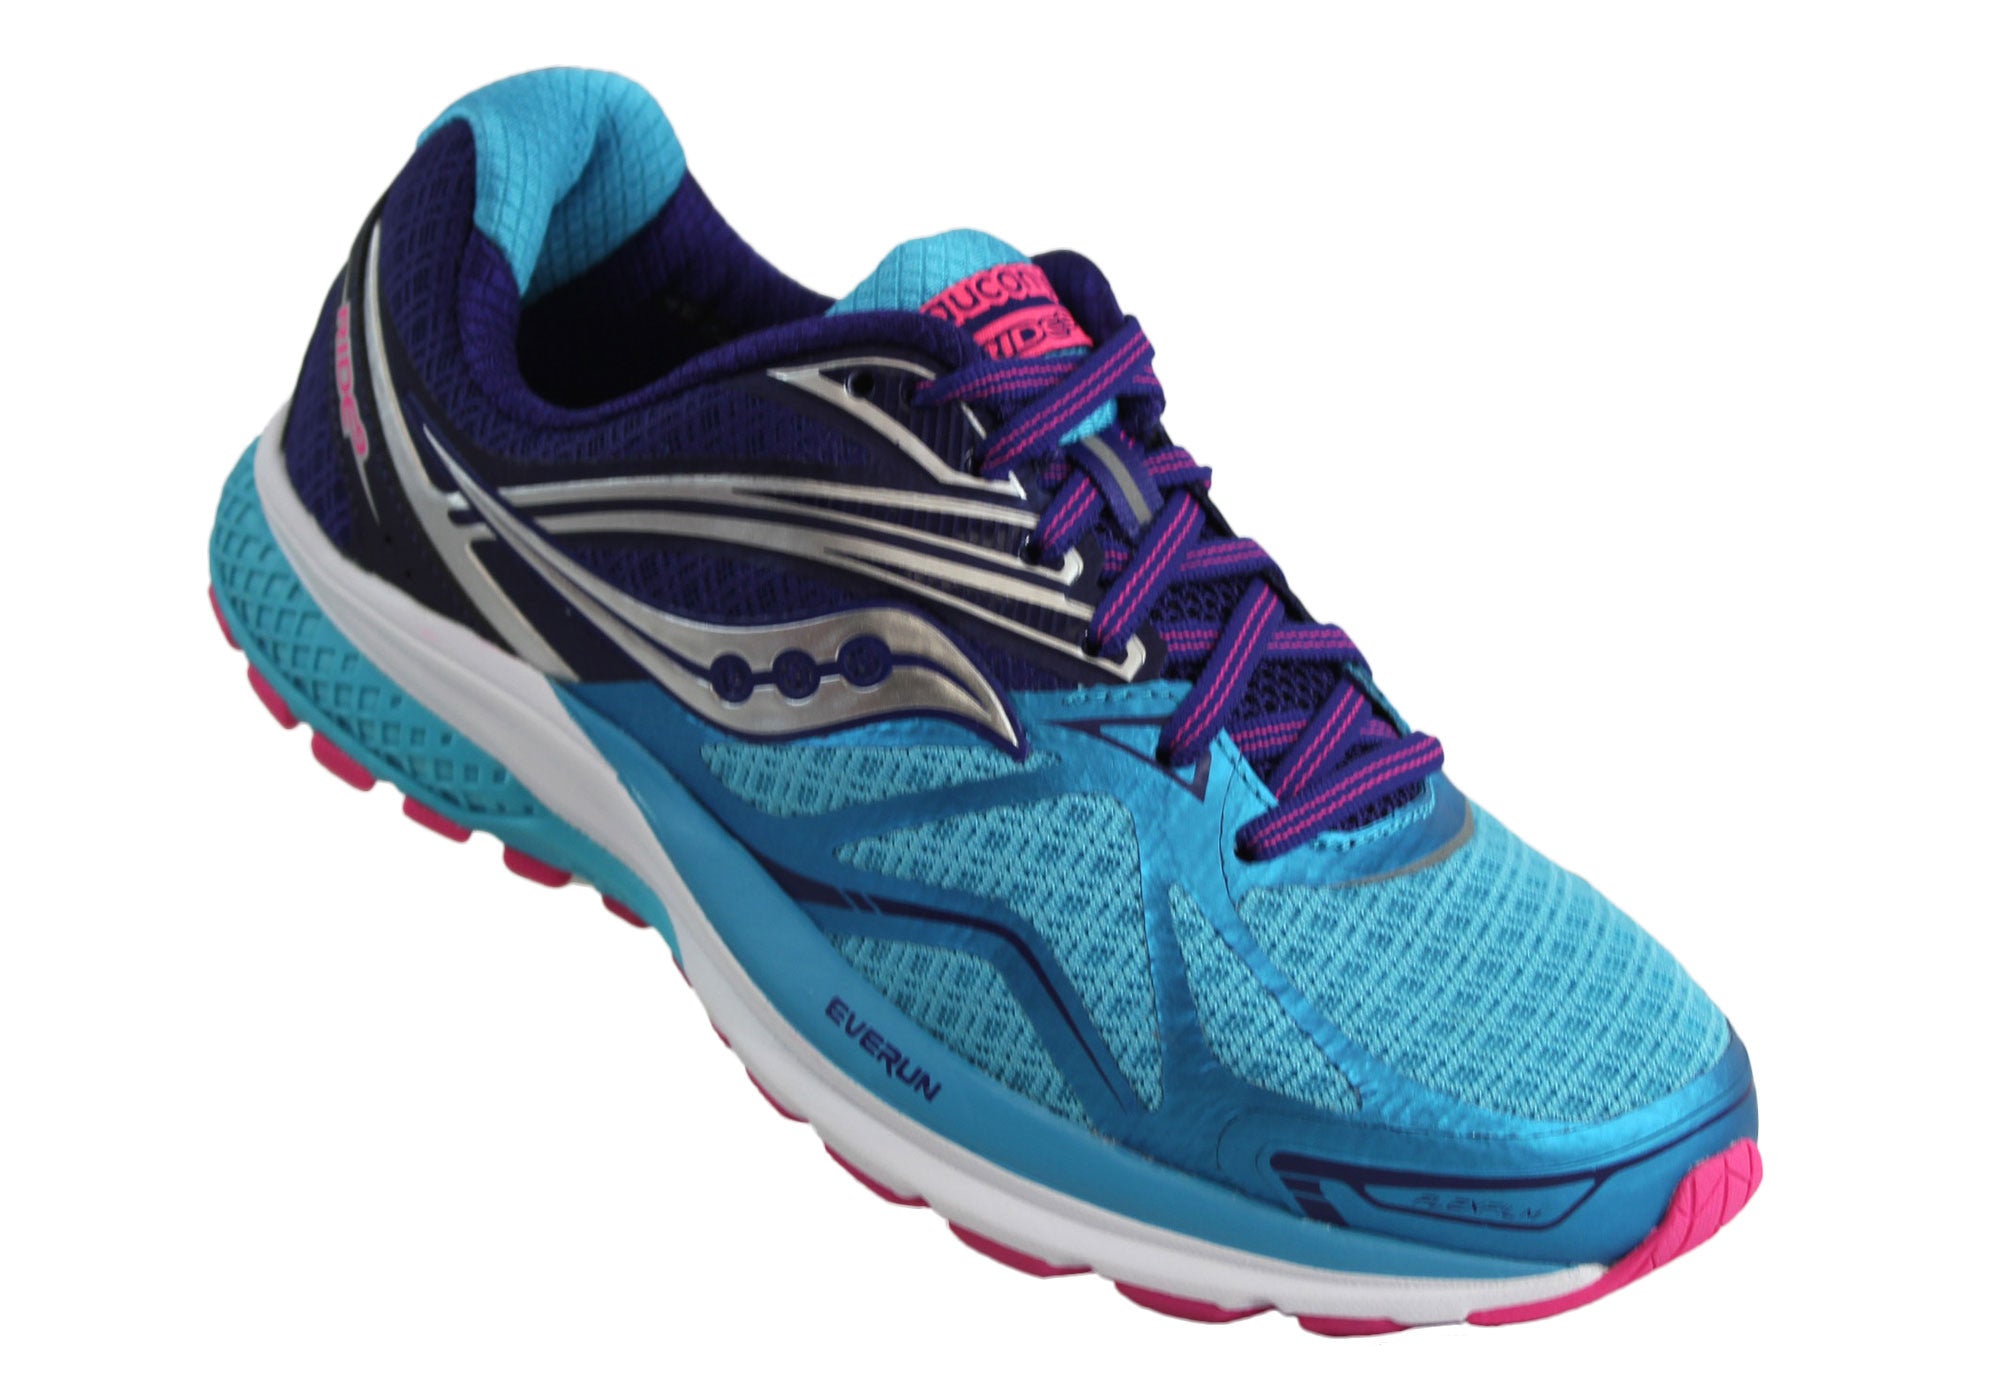 50 best ideas for coloring Running Shoe Brands